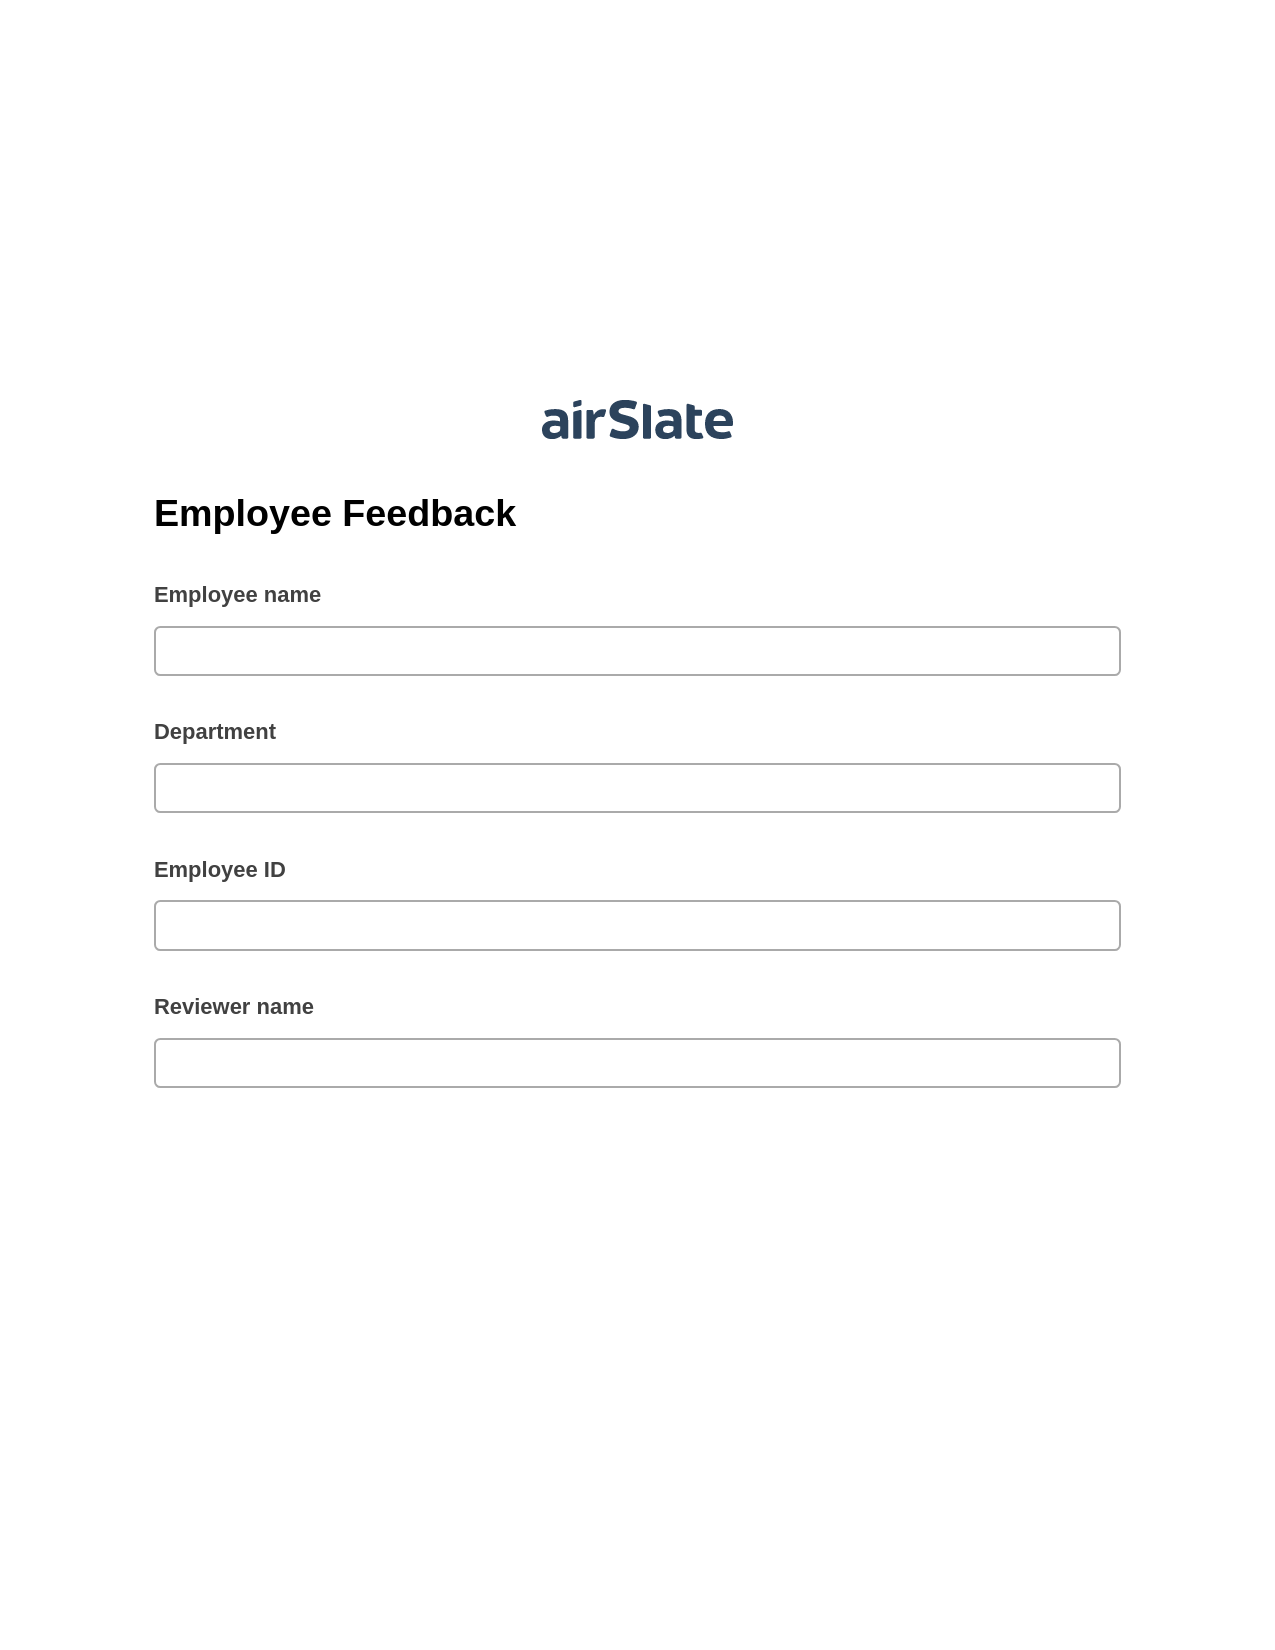 Employee Feedback Pre-fill Slate from MS Dynamics 365 Records Bot, Roles Reminder Bot, Google Drive Bot